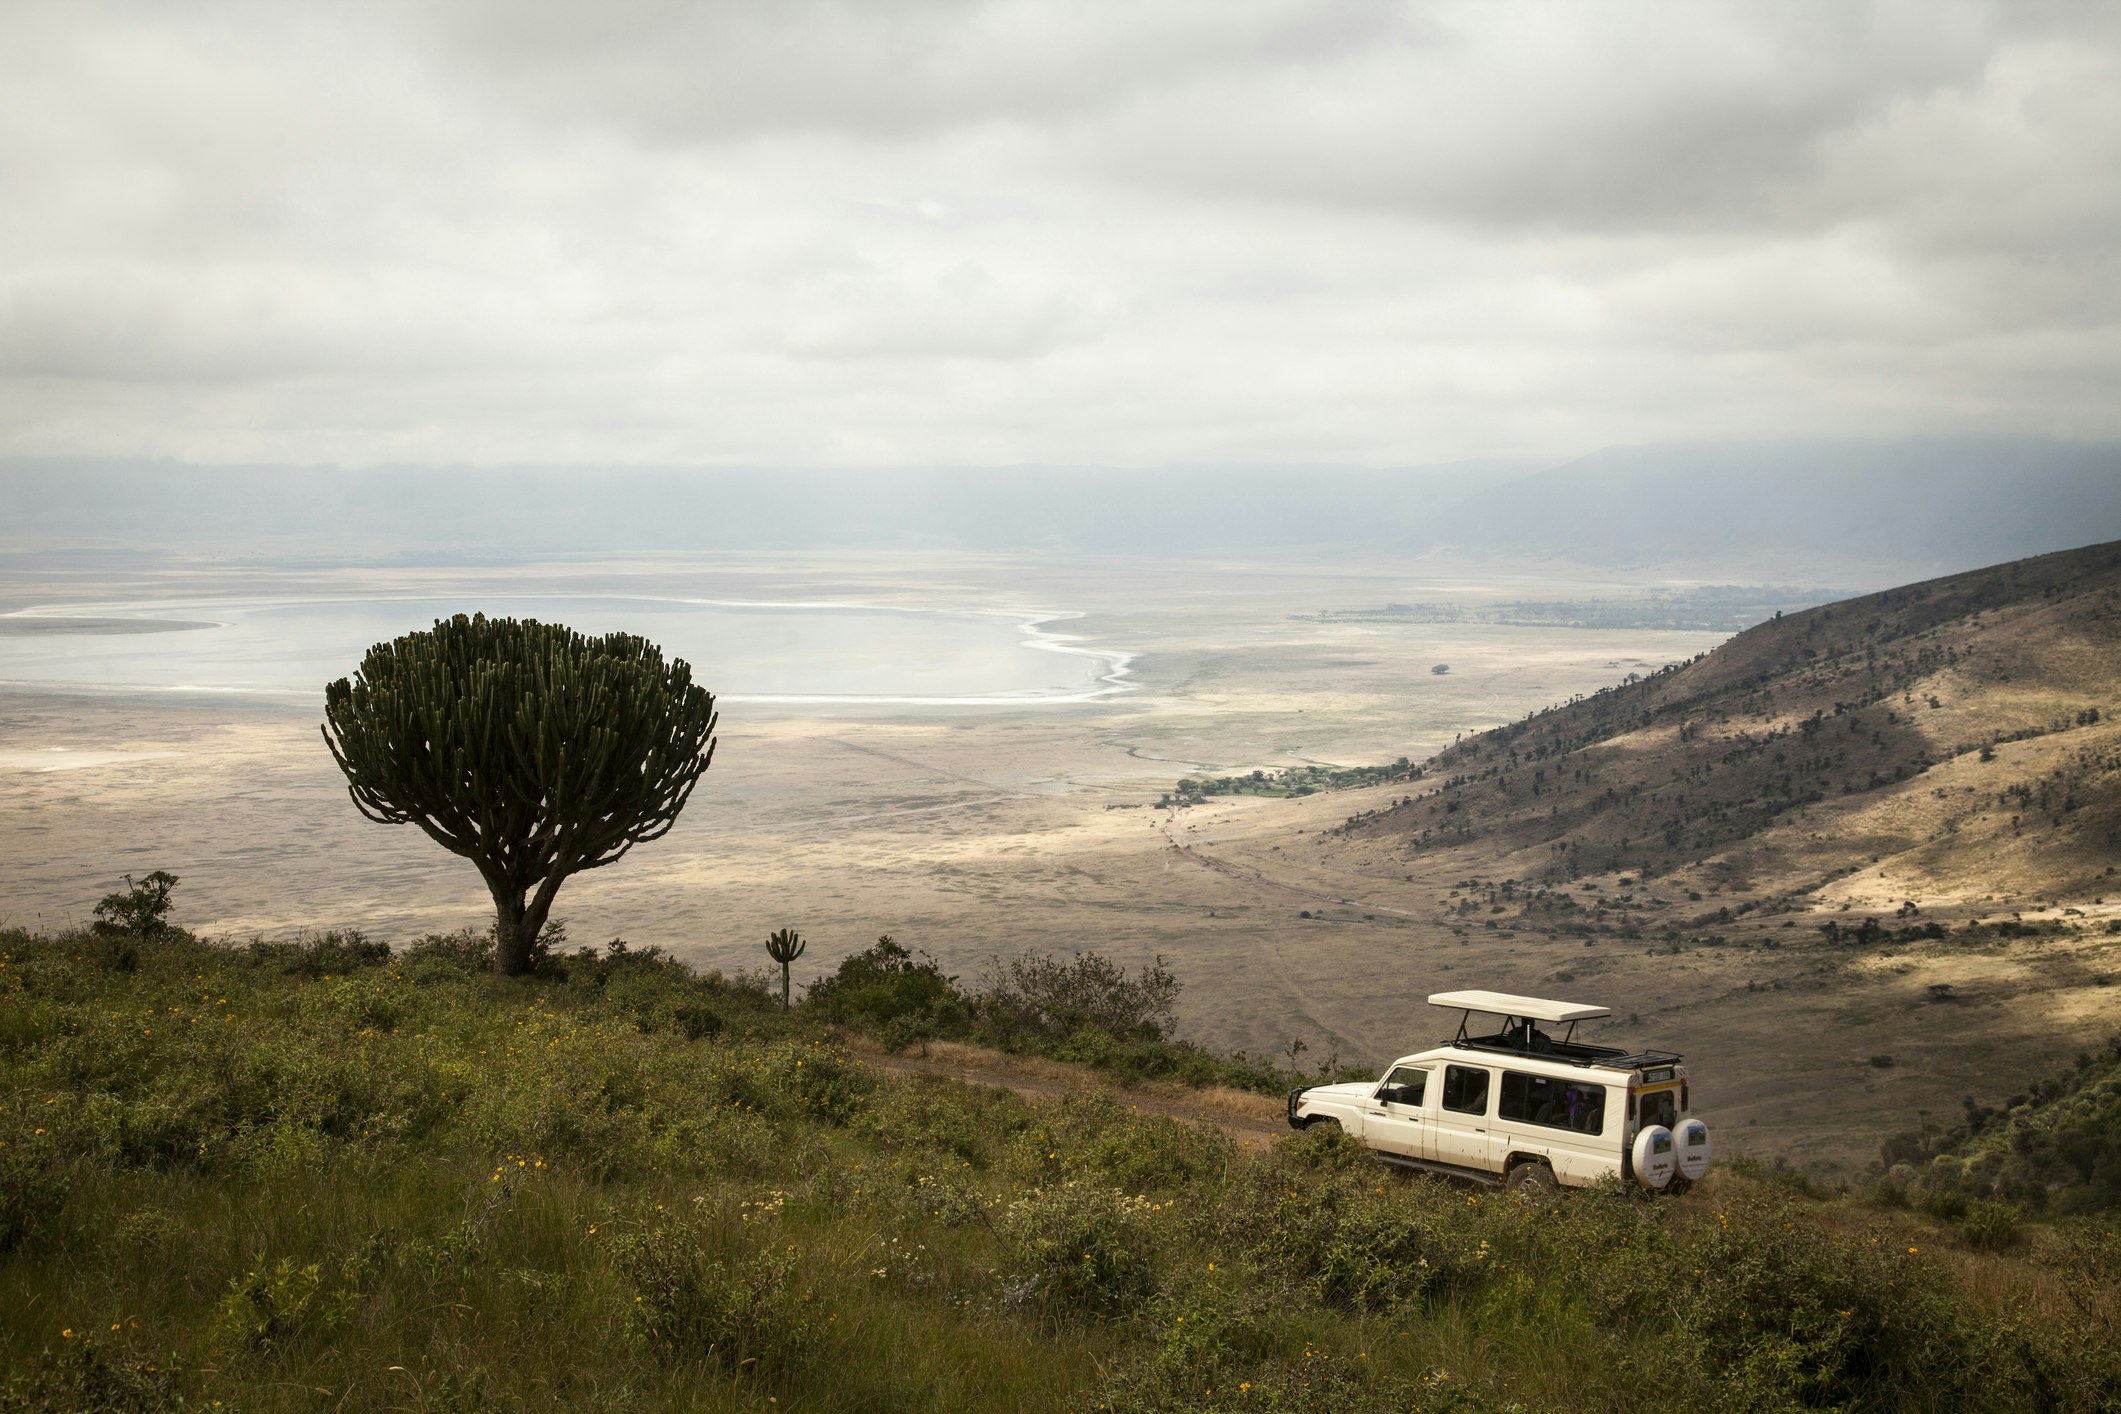 Travel News - A safari truck descends into the Ngorongoro Crater